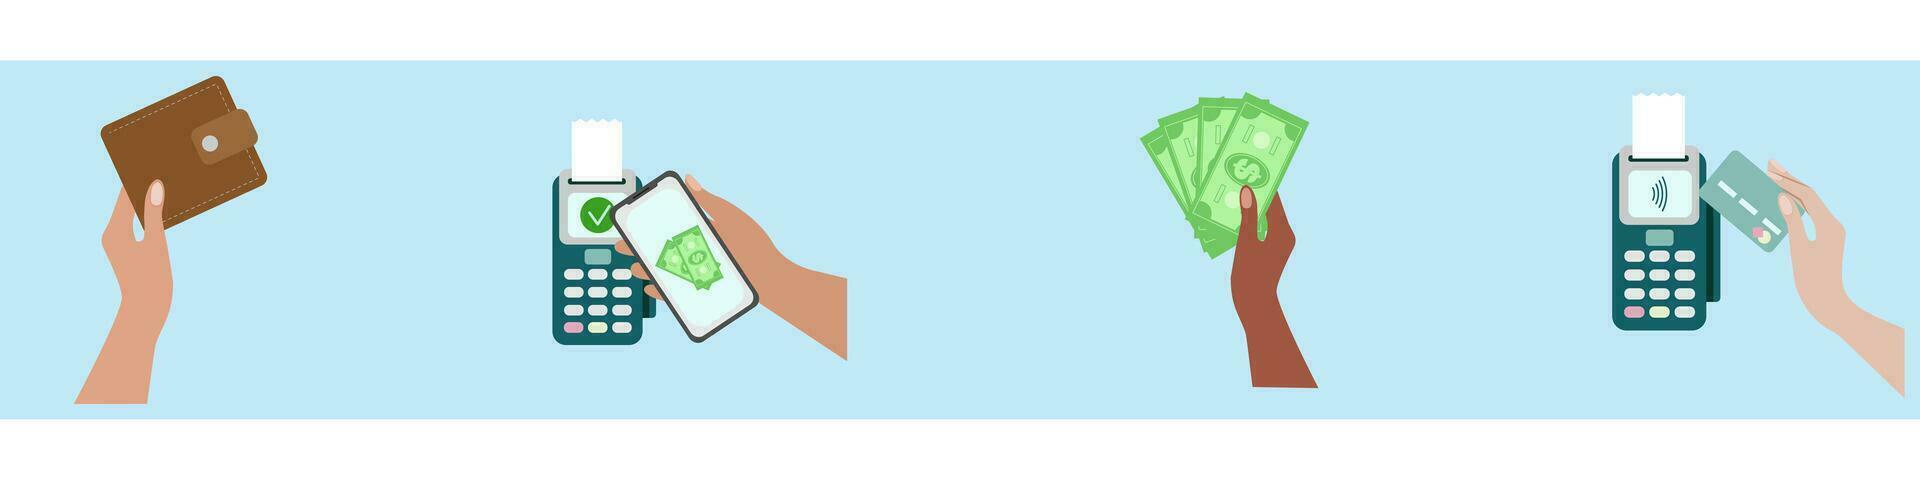 Set of hands making payment in different ways. Contactless payment by phone, bank card, devices with nfs, banknotes, wallet. Contactless Terminal, online money transfers, banking. Vector illustration